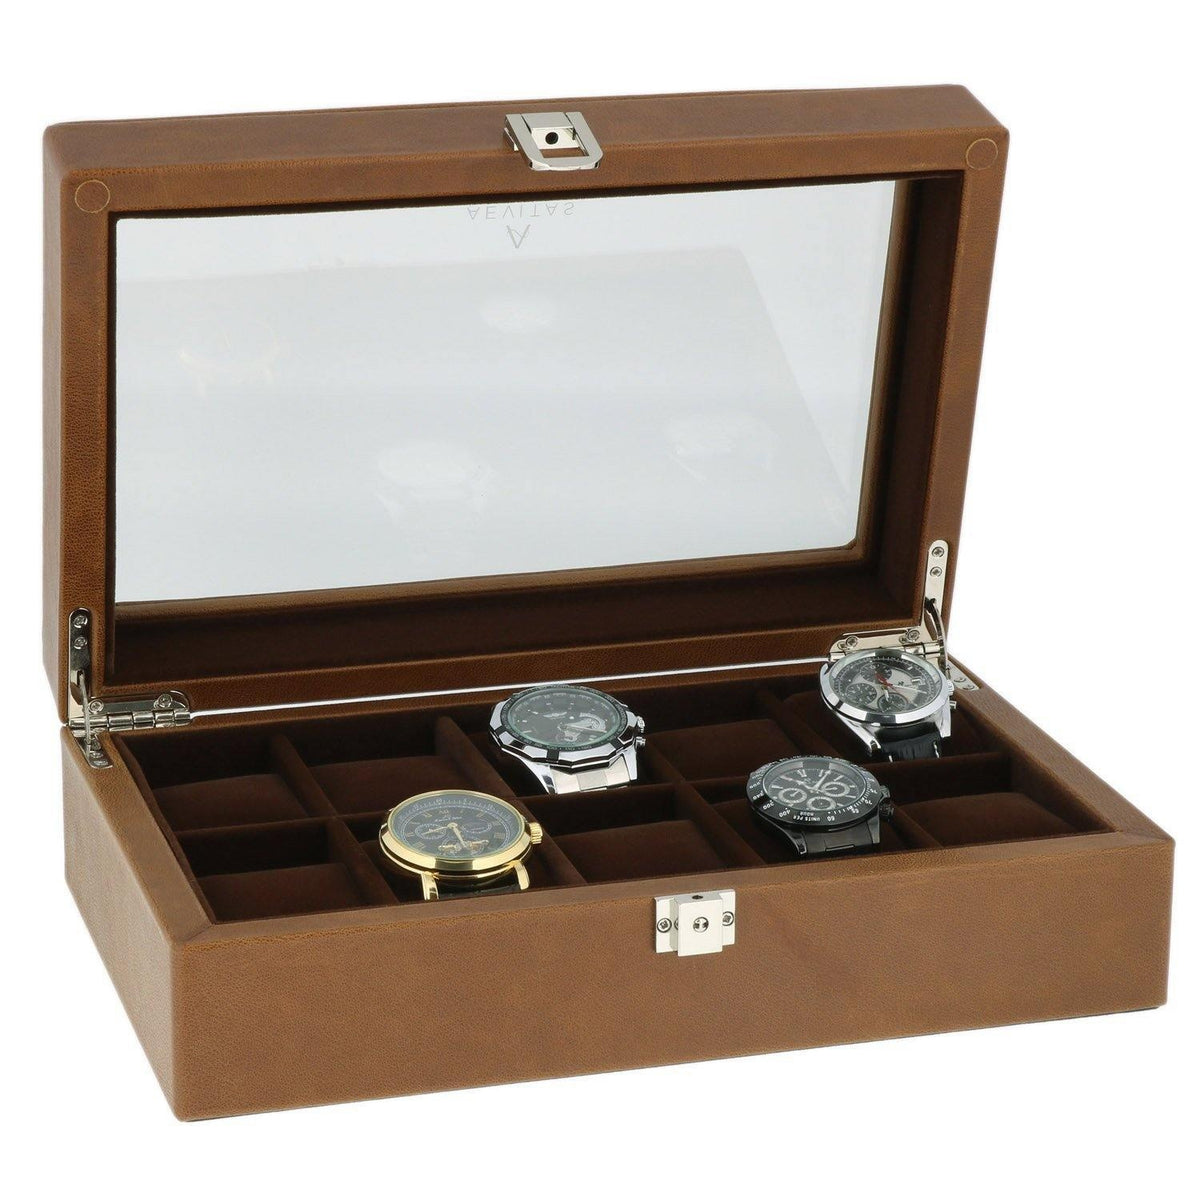 Cognac Brown Genuine Leather Watch Collectors Box for 10 Wrist Watches Brown Velvet Lining by Aevitas